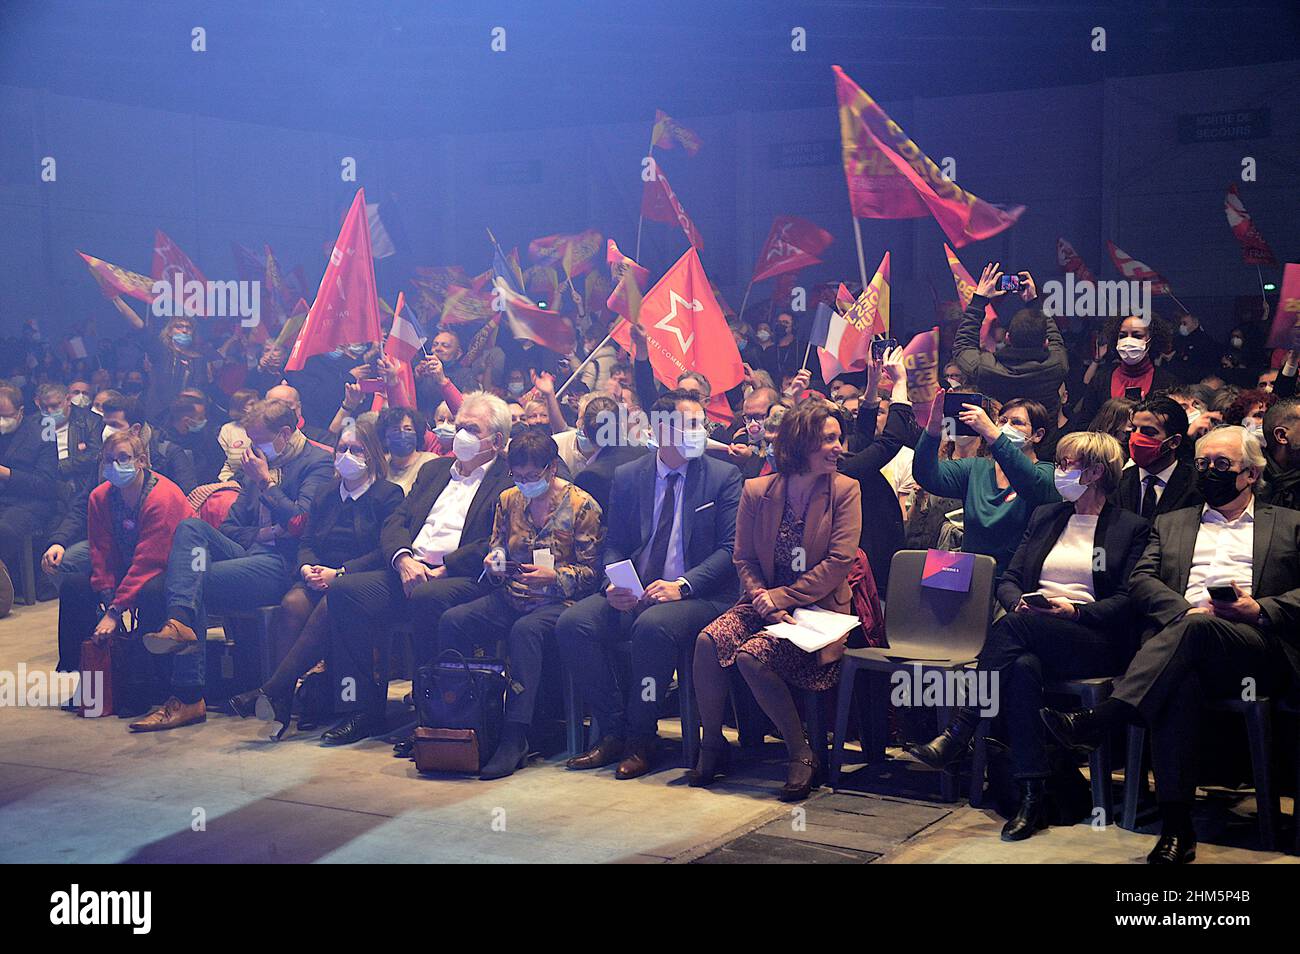 Marseille, France. 06th Feb, 2022. French Communist Party (PCF) supporters wave flags during the speech of the party's presidential candidate Fabien Roussel in Marseille.Fabien Roussel, candidate of the French Communist Party (PCF), chose Marseille for his first campaign rally in the French presidential election. (Photo by Gerard Bottino/SOPA Images/Sipa USA) Credit: Sipa USA/Alamy Live News Stock Photo